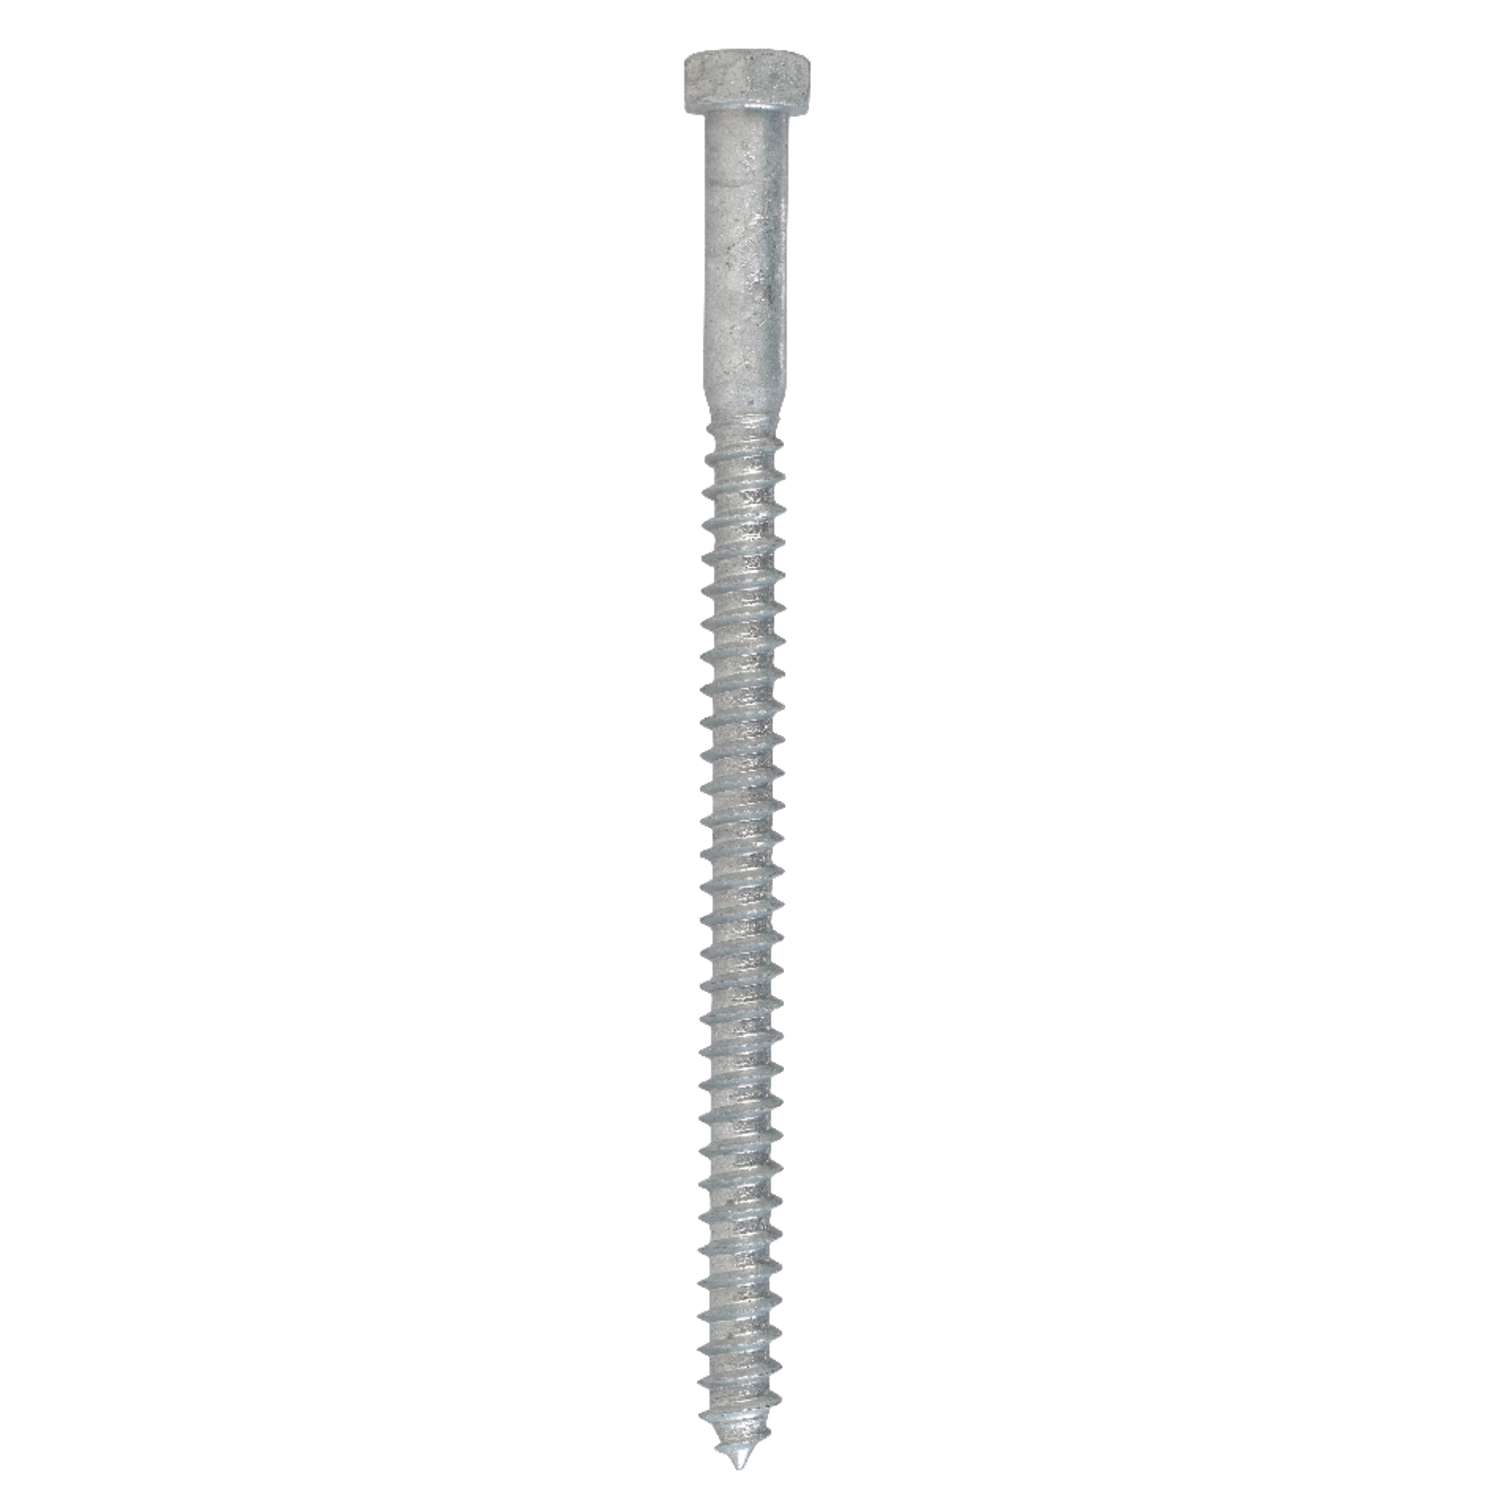 Hillman 3/8 in. X in. L Hex Hot Dipped Galvanized Steel Lag Screw 50 pk  Ace Hardware